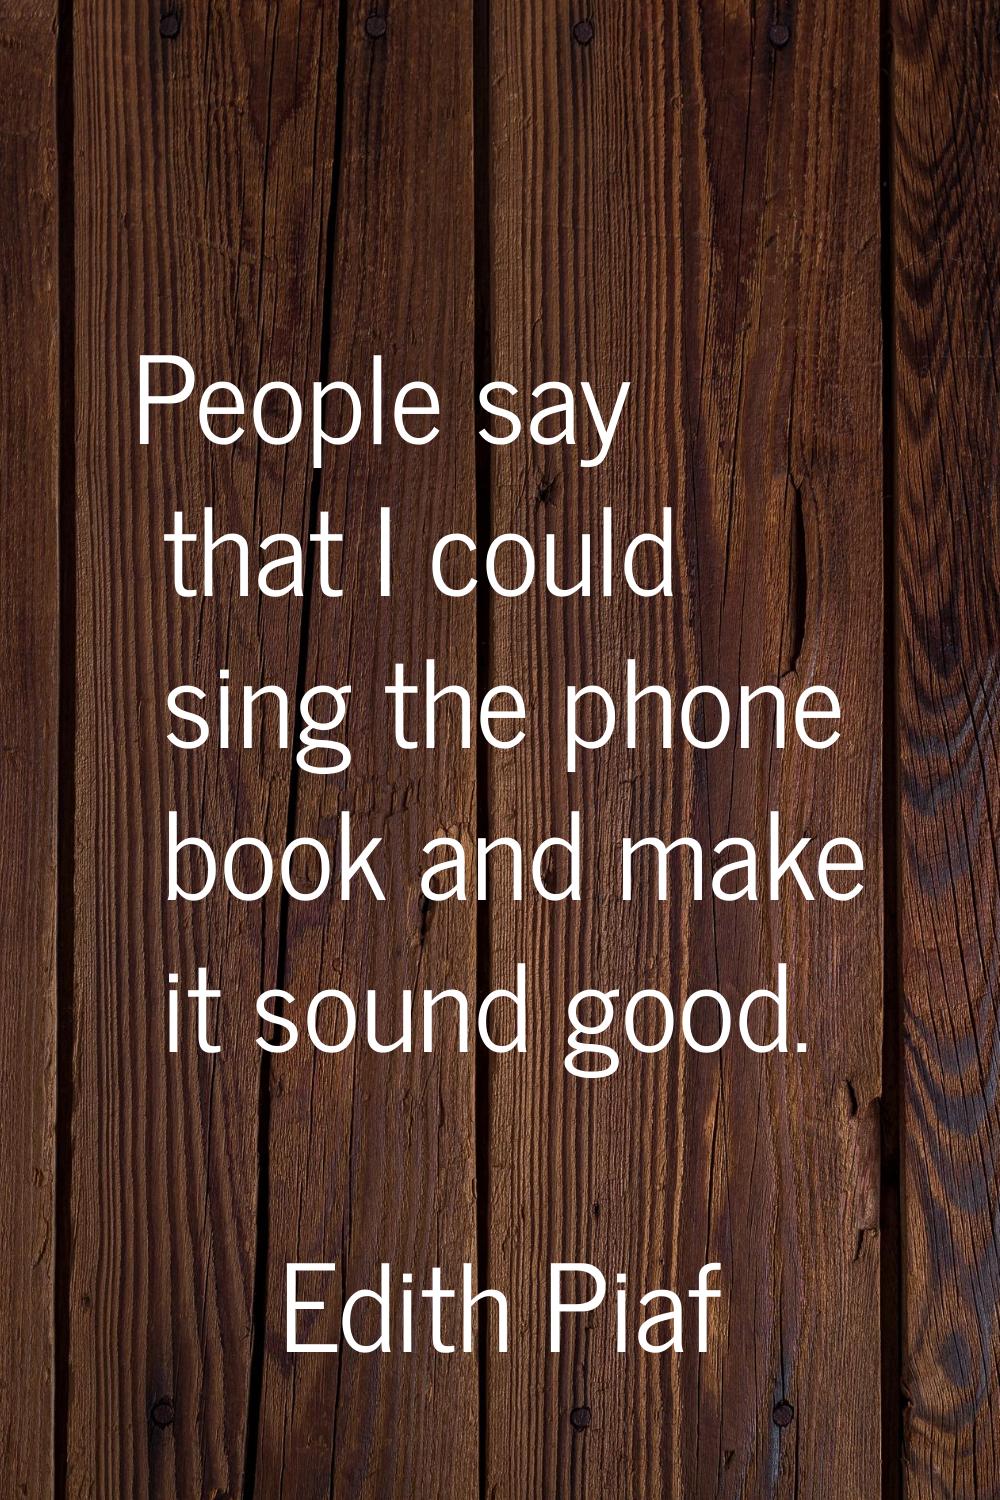 People say that I could sing the phone book and make it sound good.